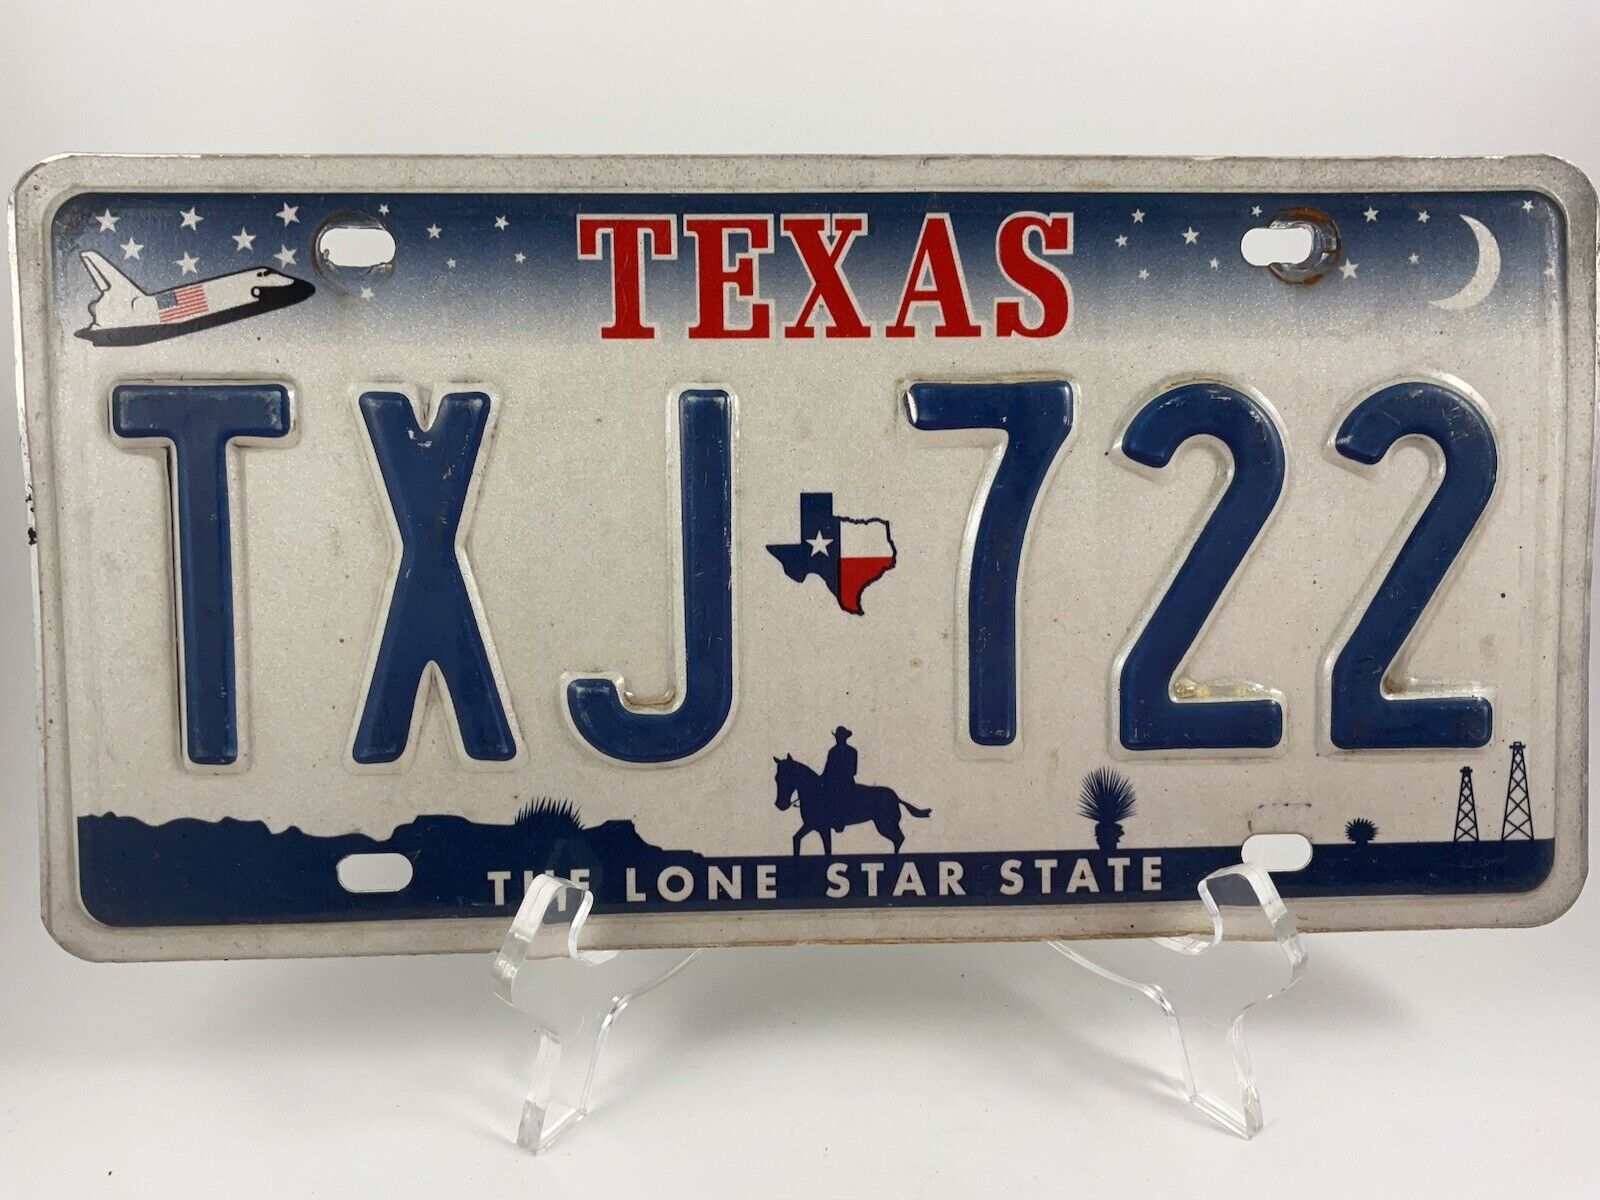 Vintage Texas License Plate The Lone Star State Retired Not For Road Use